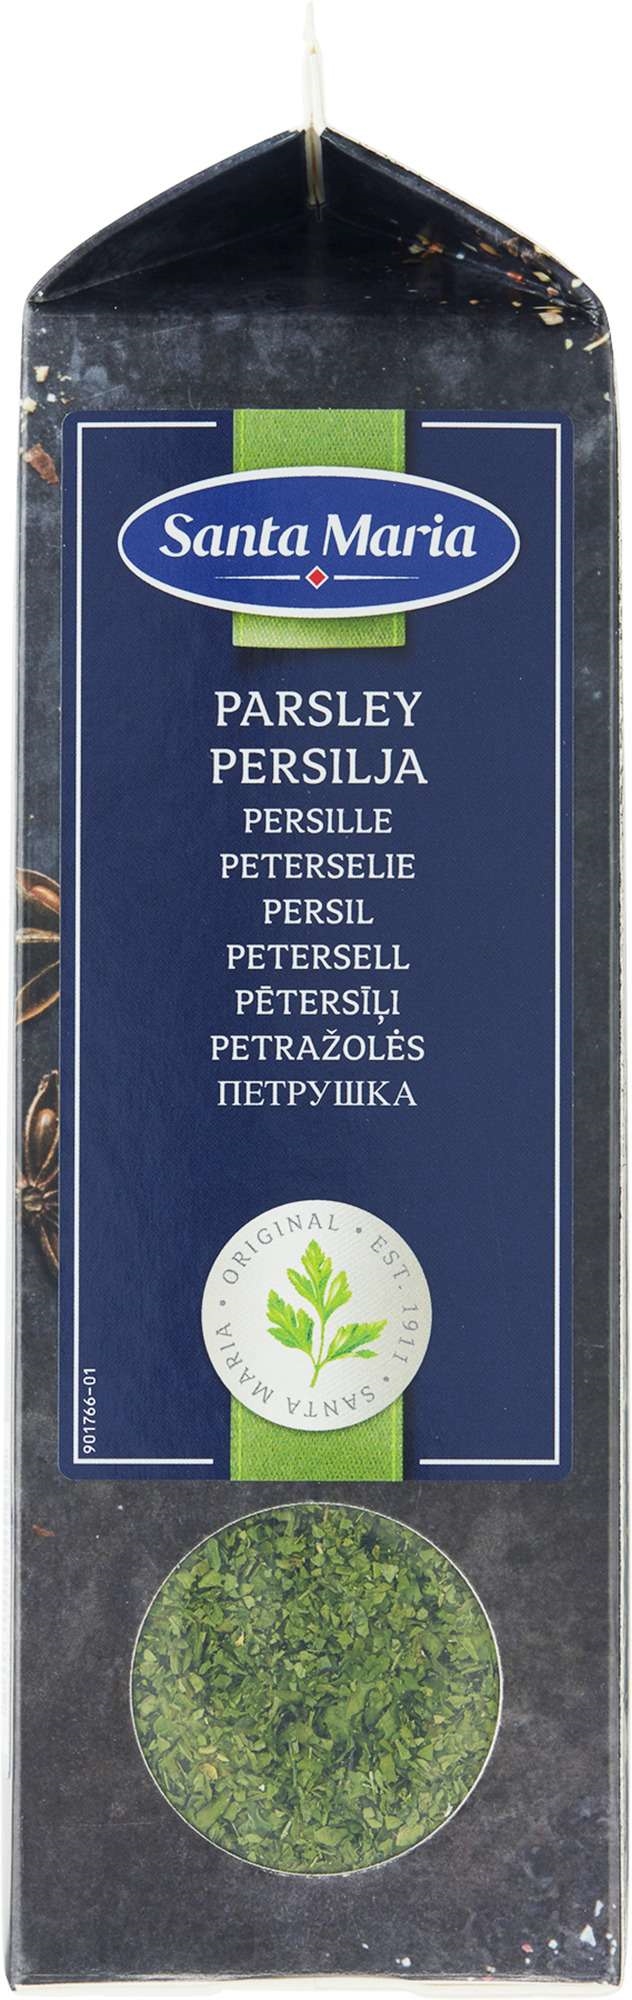 Persille   95g